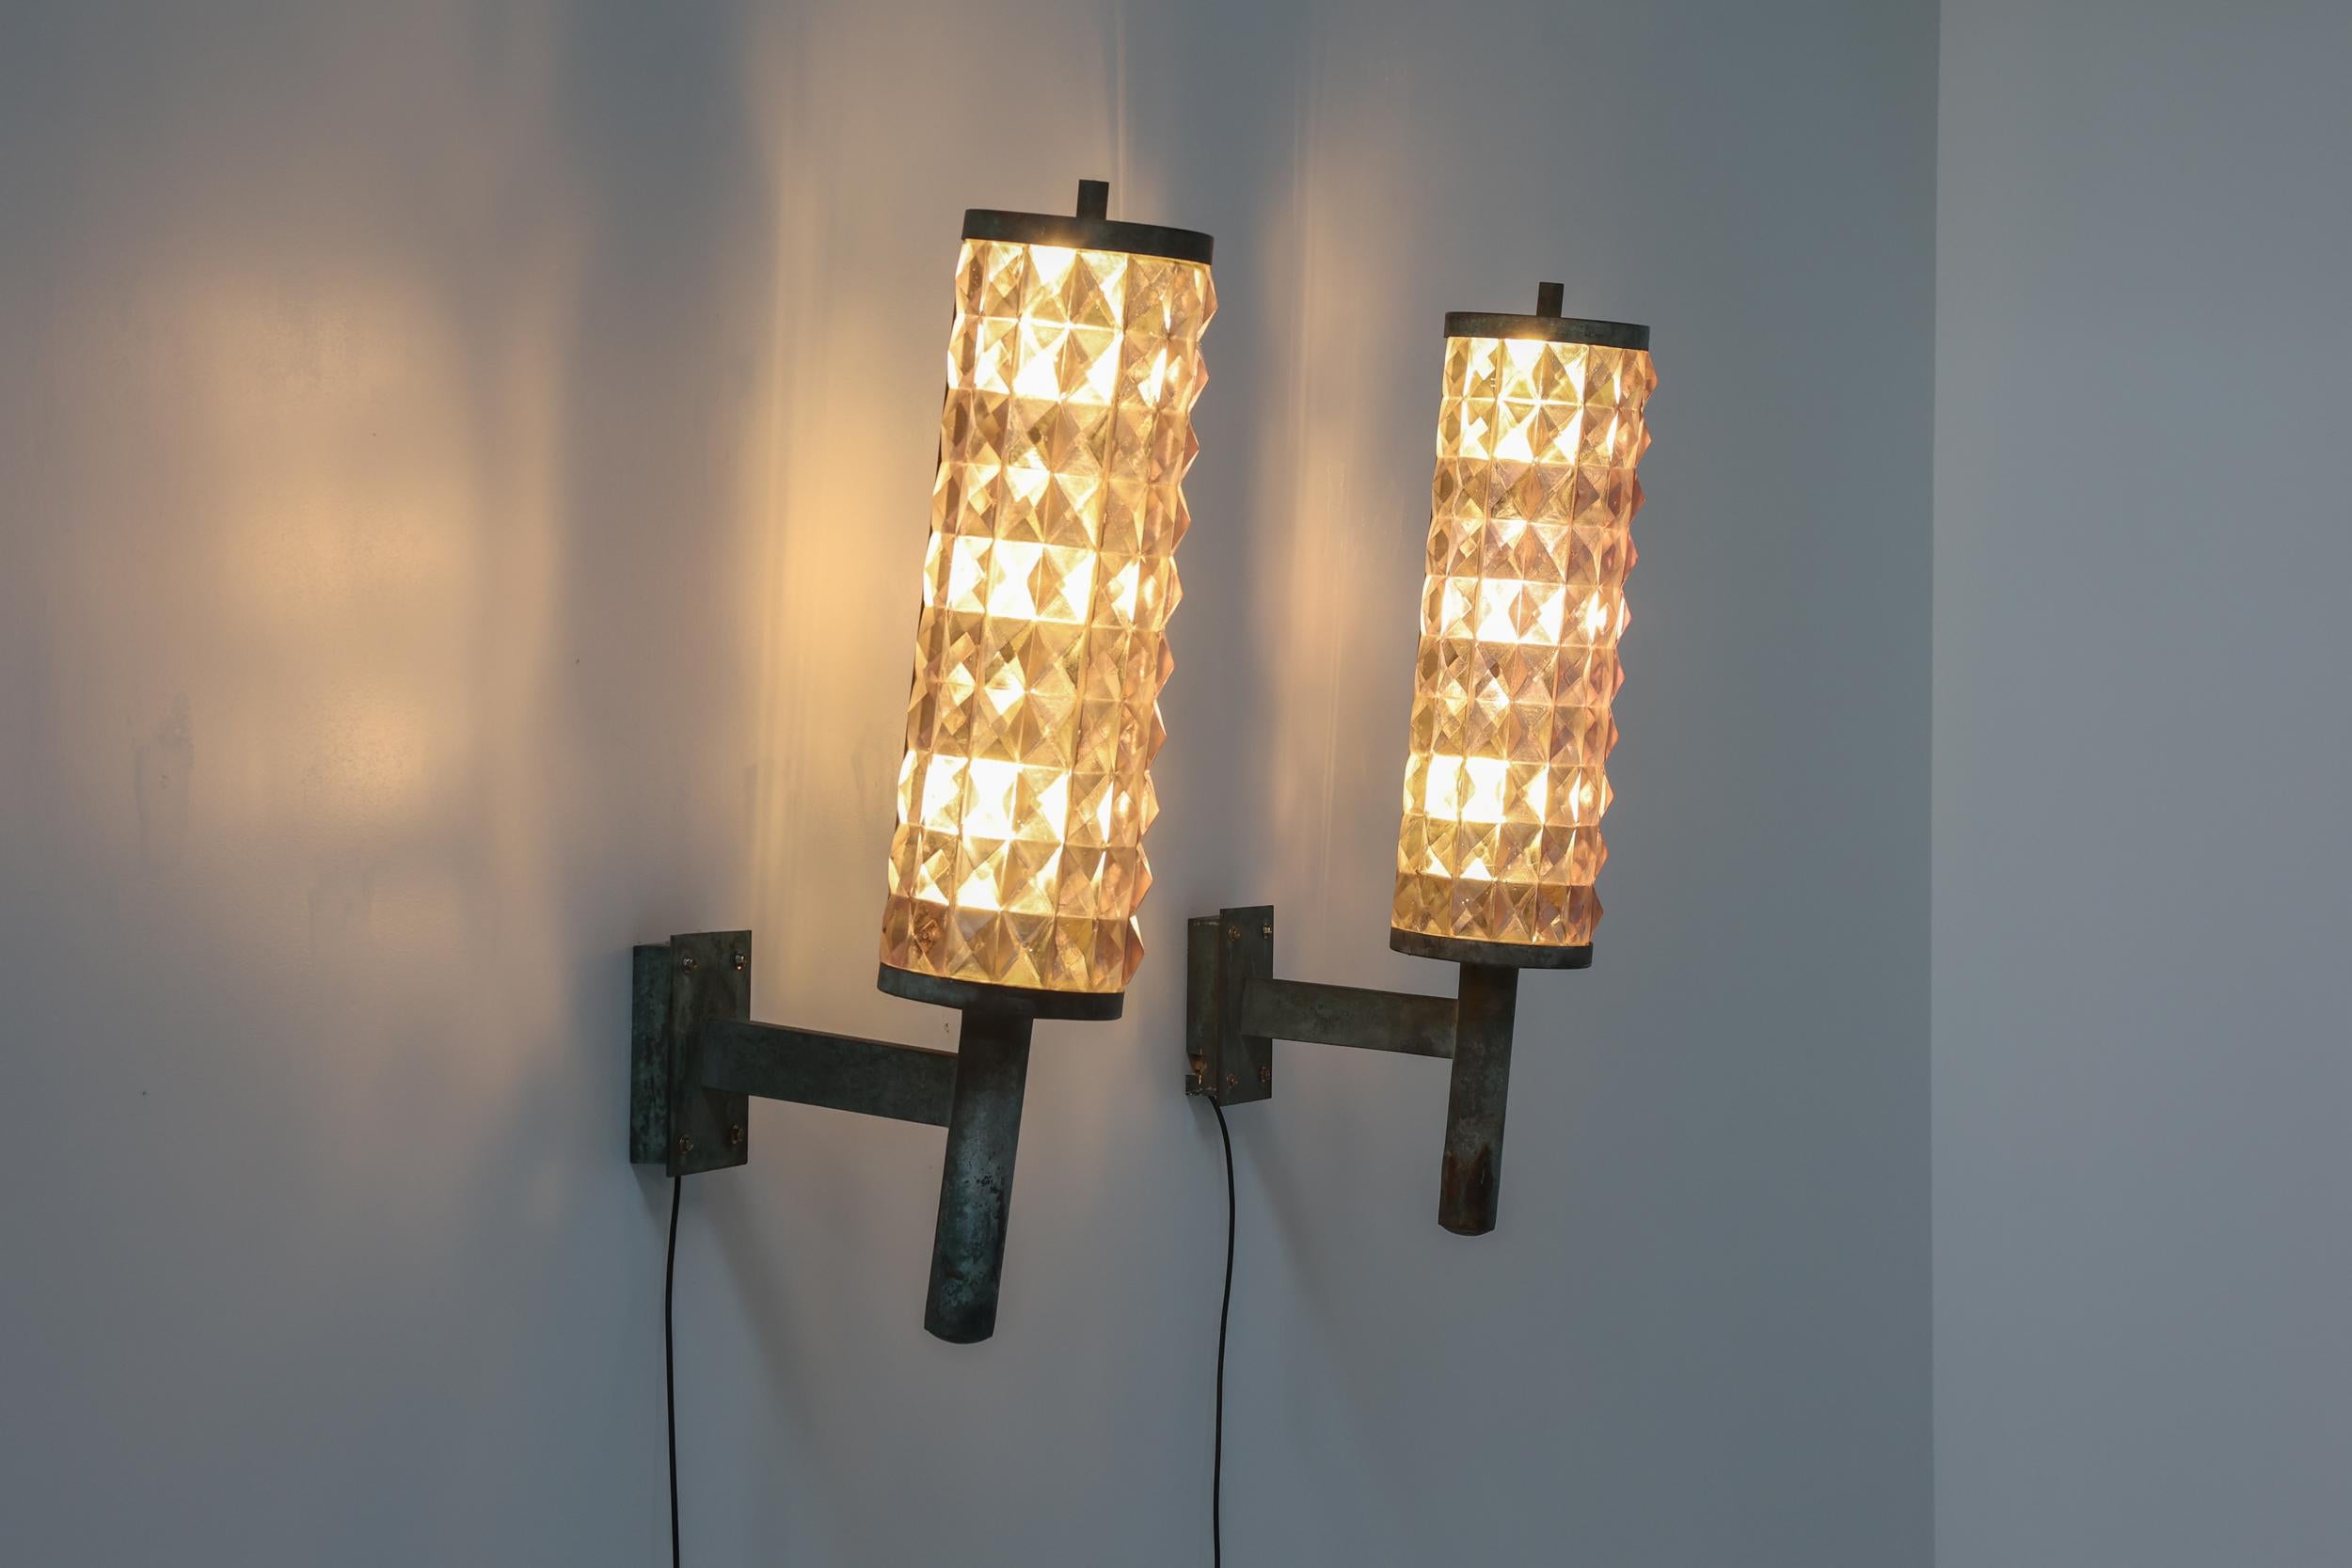 French Art Deco Iron & Glass Wall Sconces, 1930s For Sale